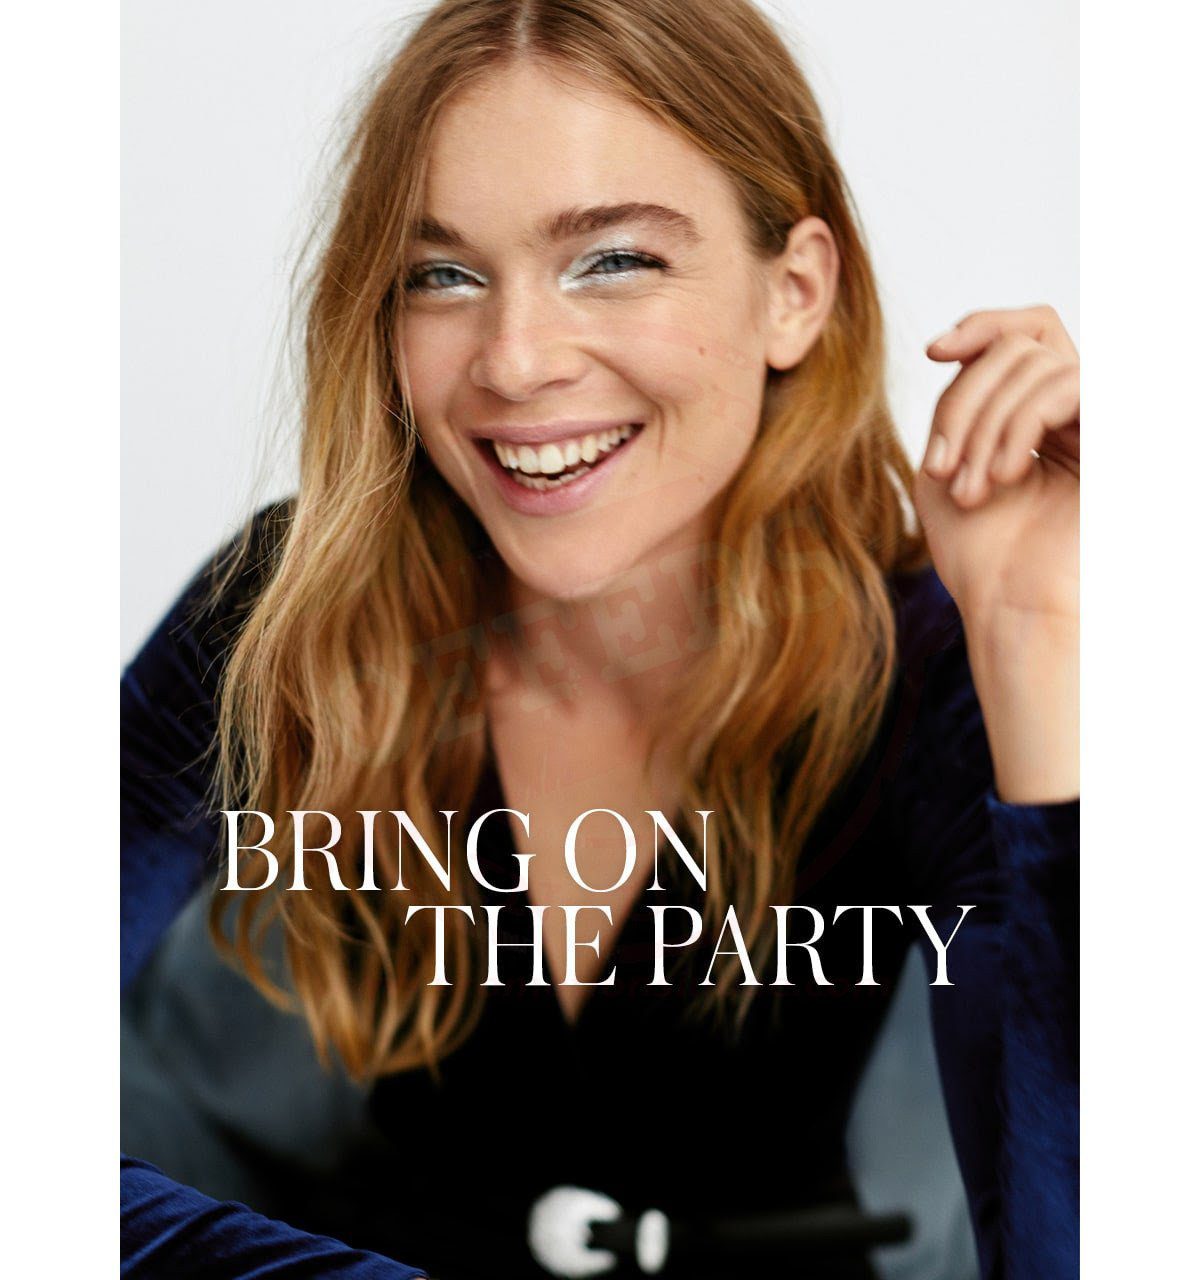 MANGO Bring on the party | The festive season is here